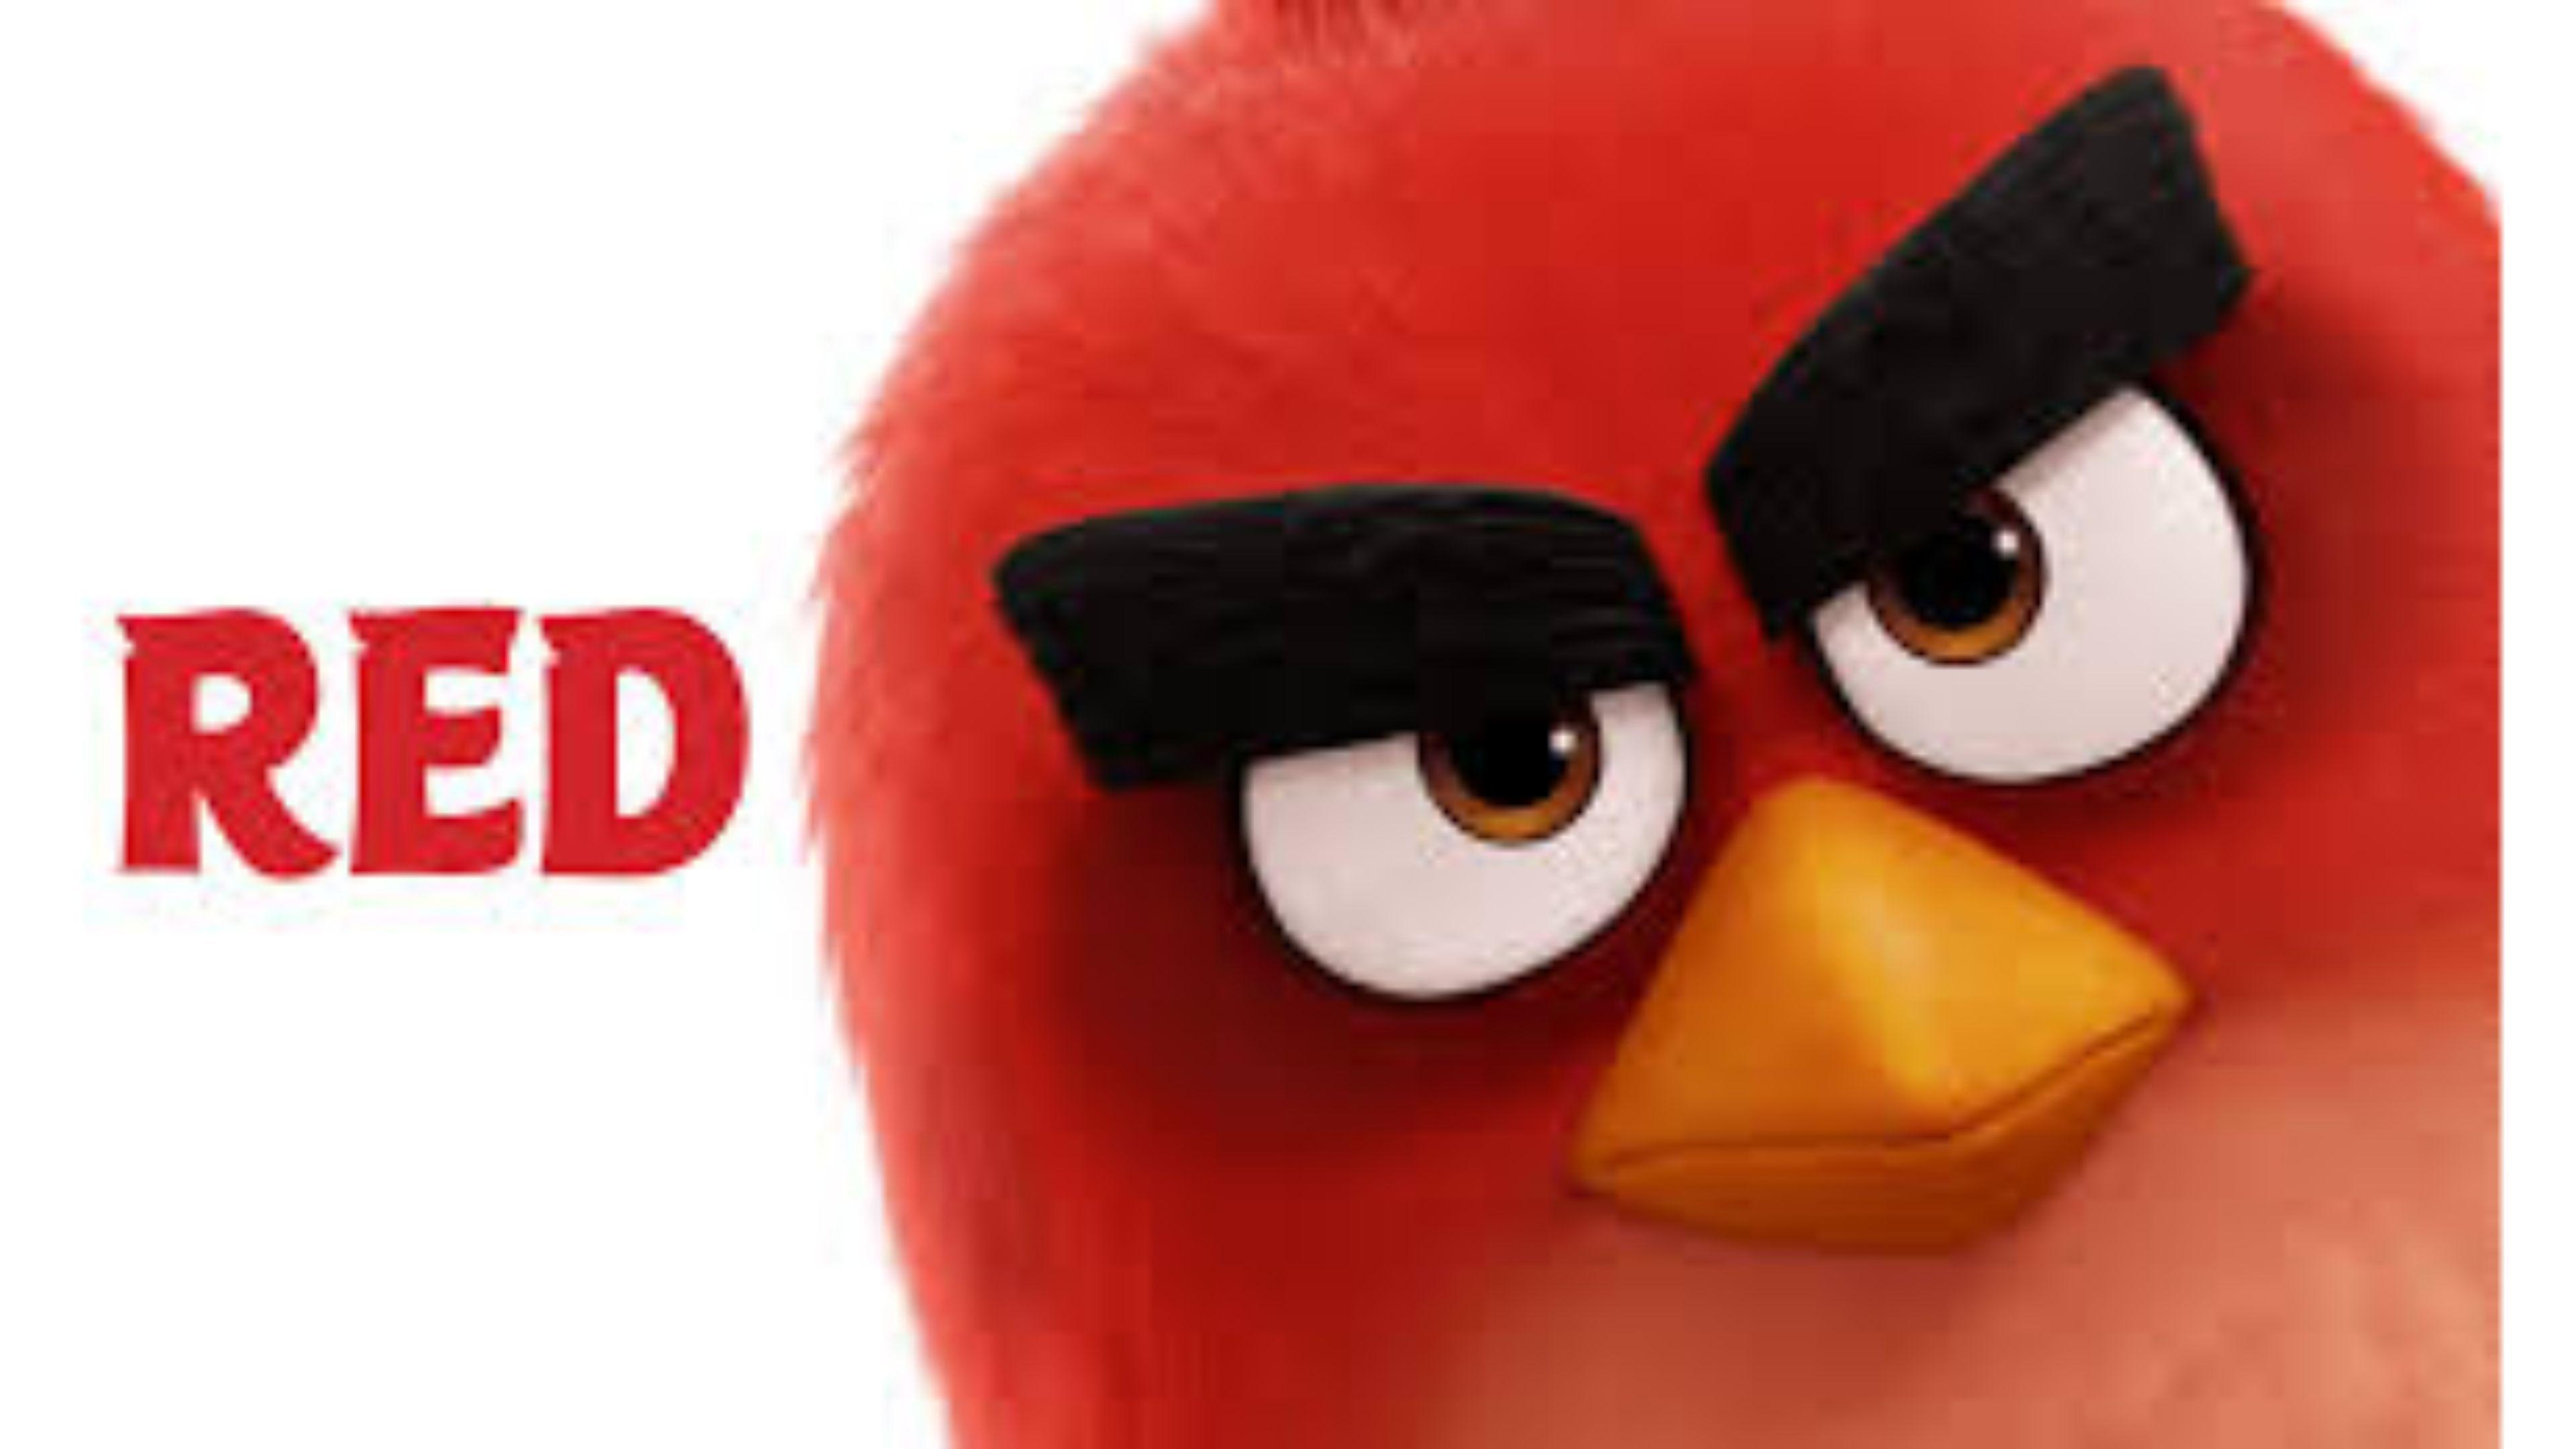 RED Angry Birds Movie Wallpaper, HD RED Angry Birds Movie